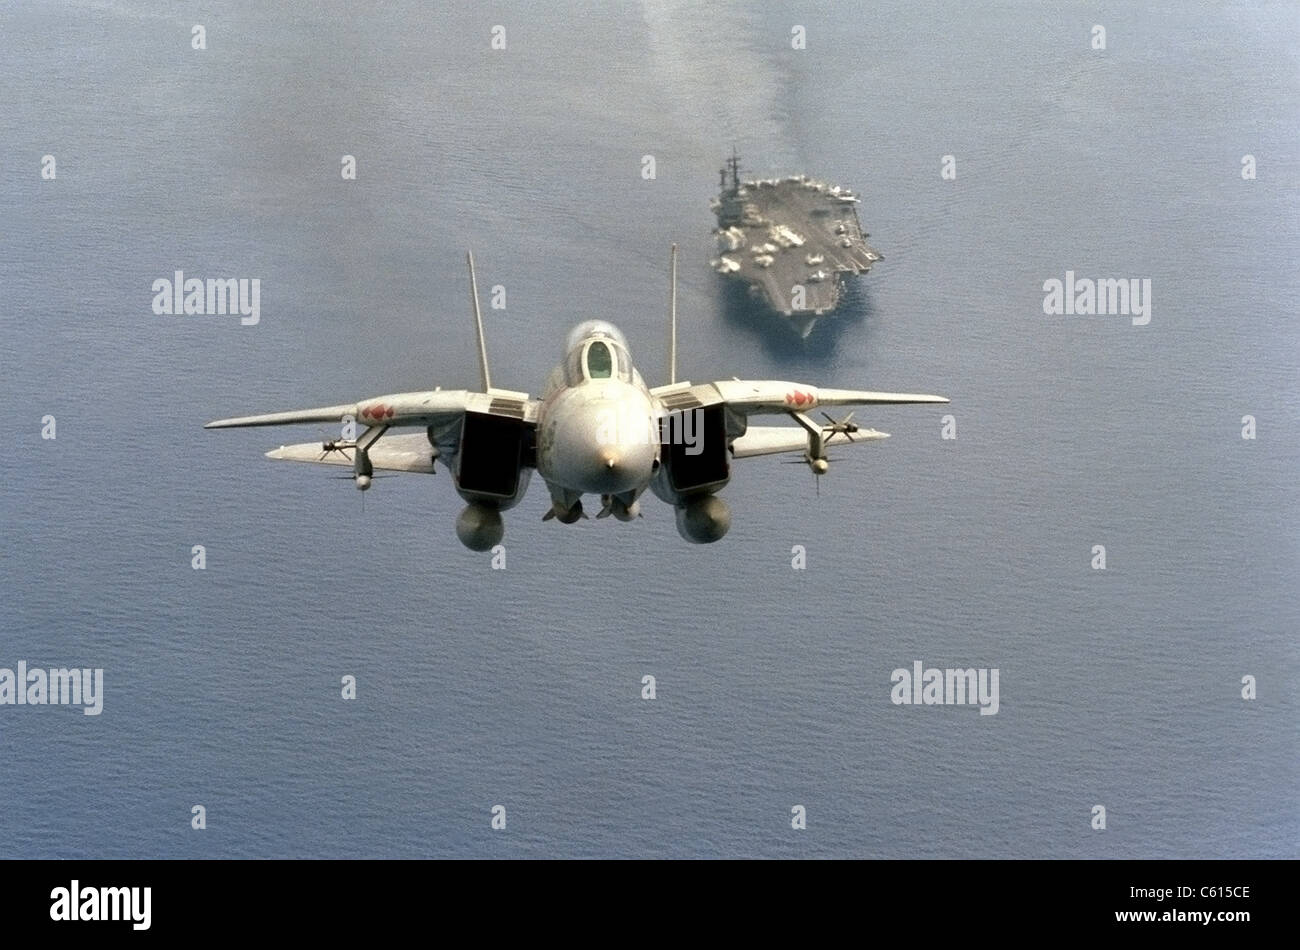 F-14 Tomcat fighter just after take-off from the aircraft carrier USS AMERICA is armed with missiles mounted on wing pylons. 1984. (BSLOC 2011 12 214) Stock Photo